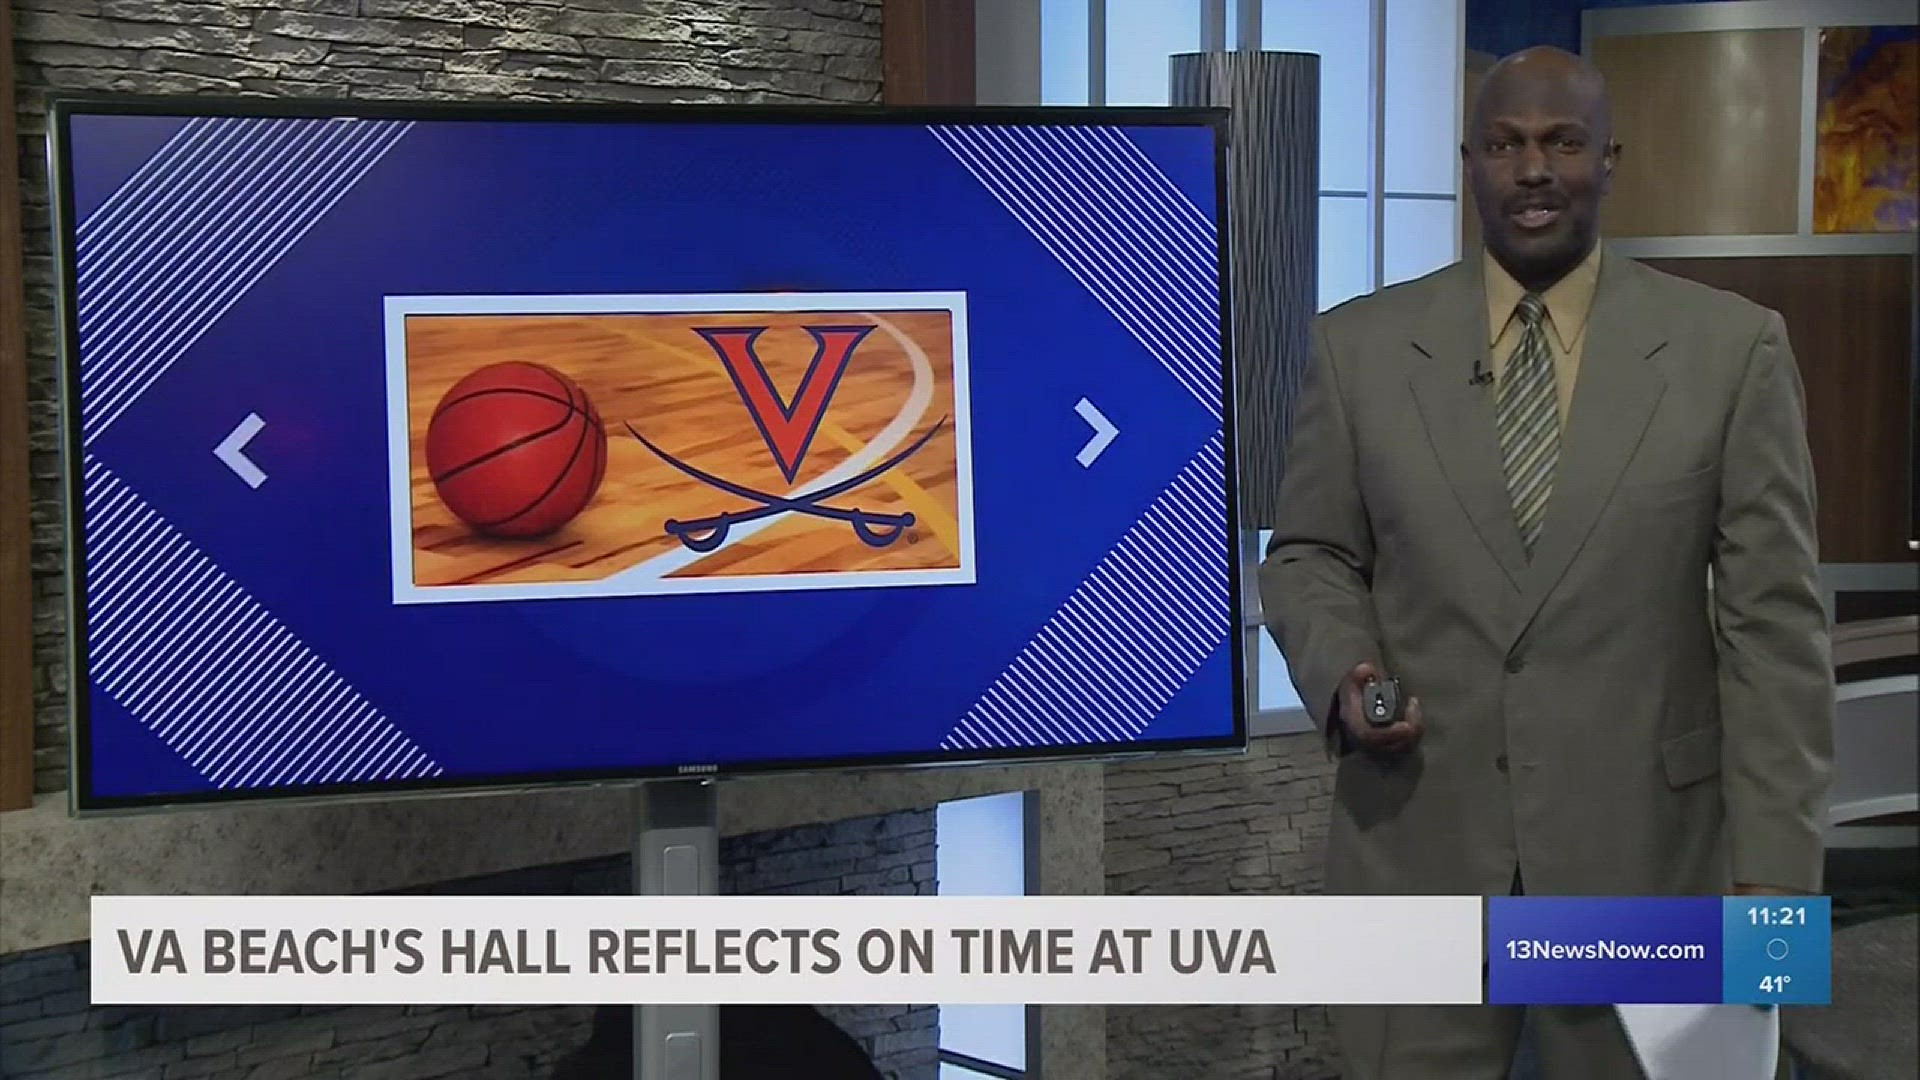 UVA guard, Devon Hall played his last game as a Wahoo when the Cavs got upset by UMBC. He talked about his time in Charlottesville.